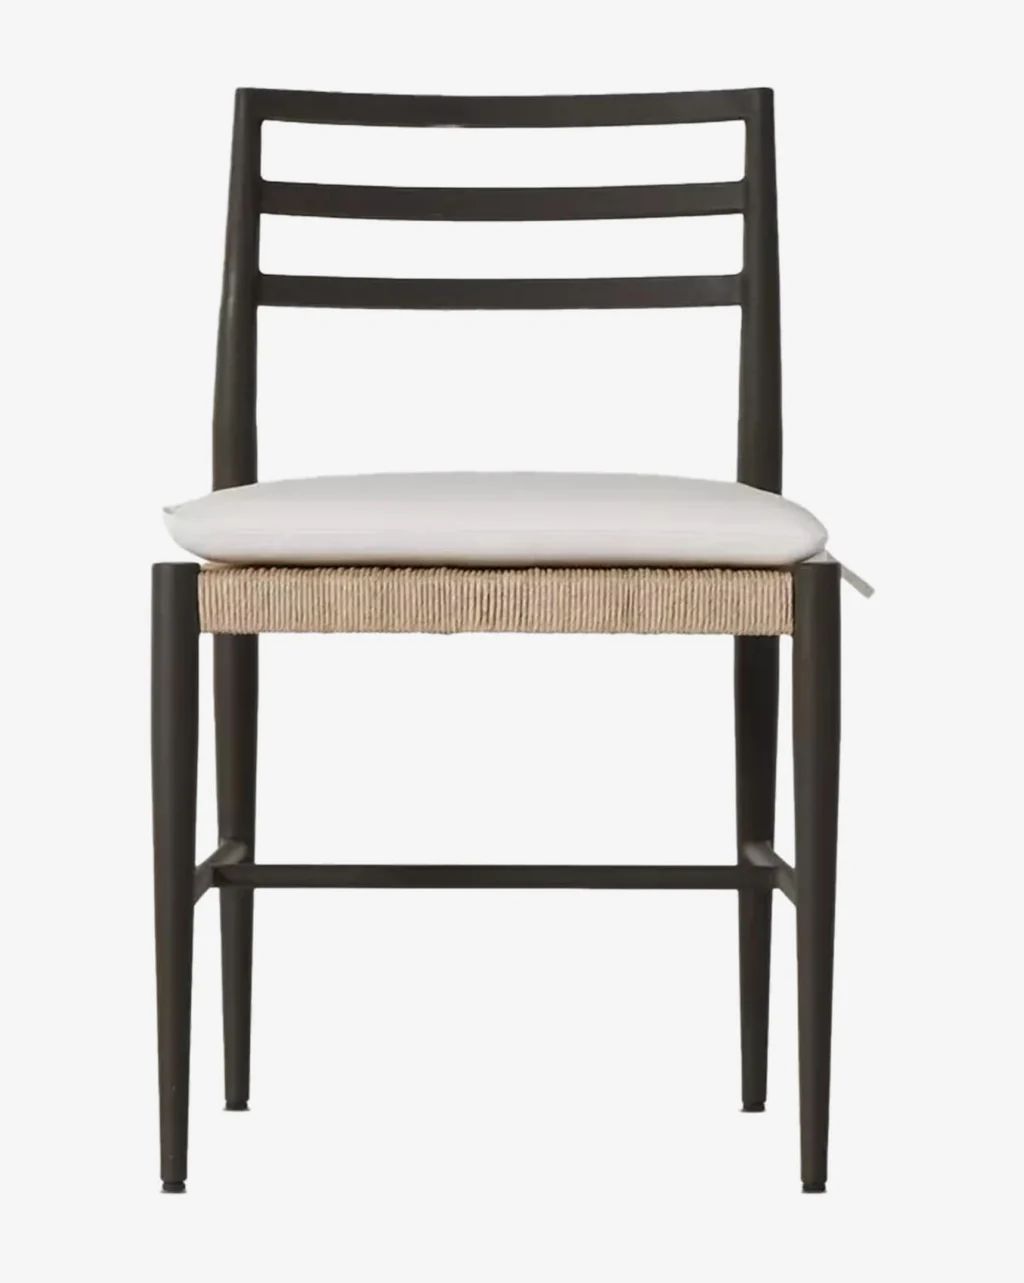 Tabitha Outdoor Dining Chair | McGee & Co.